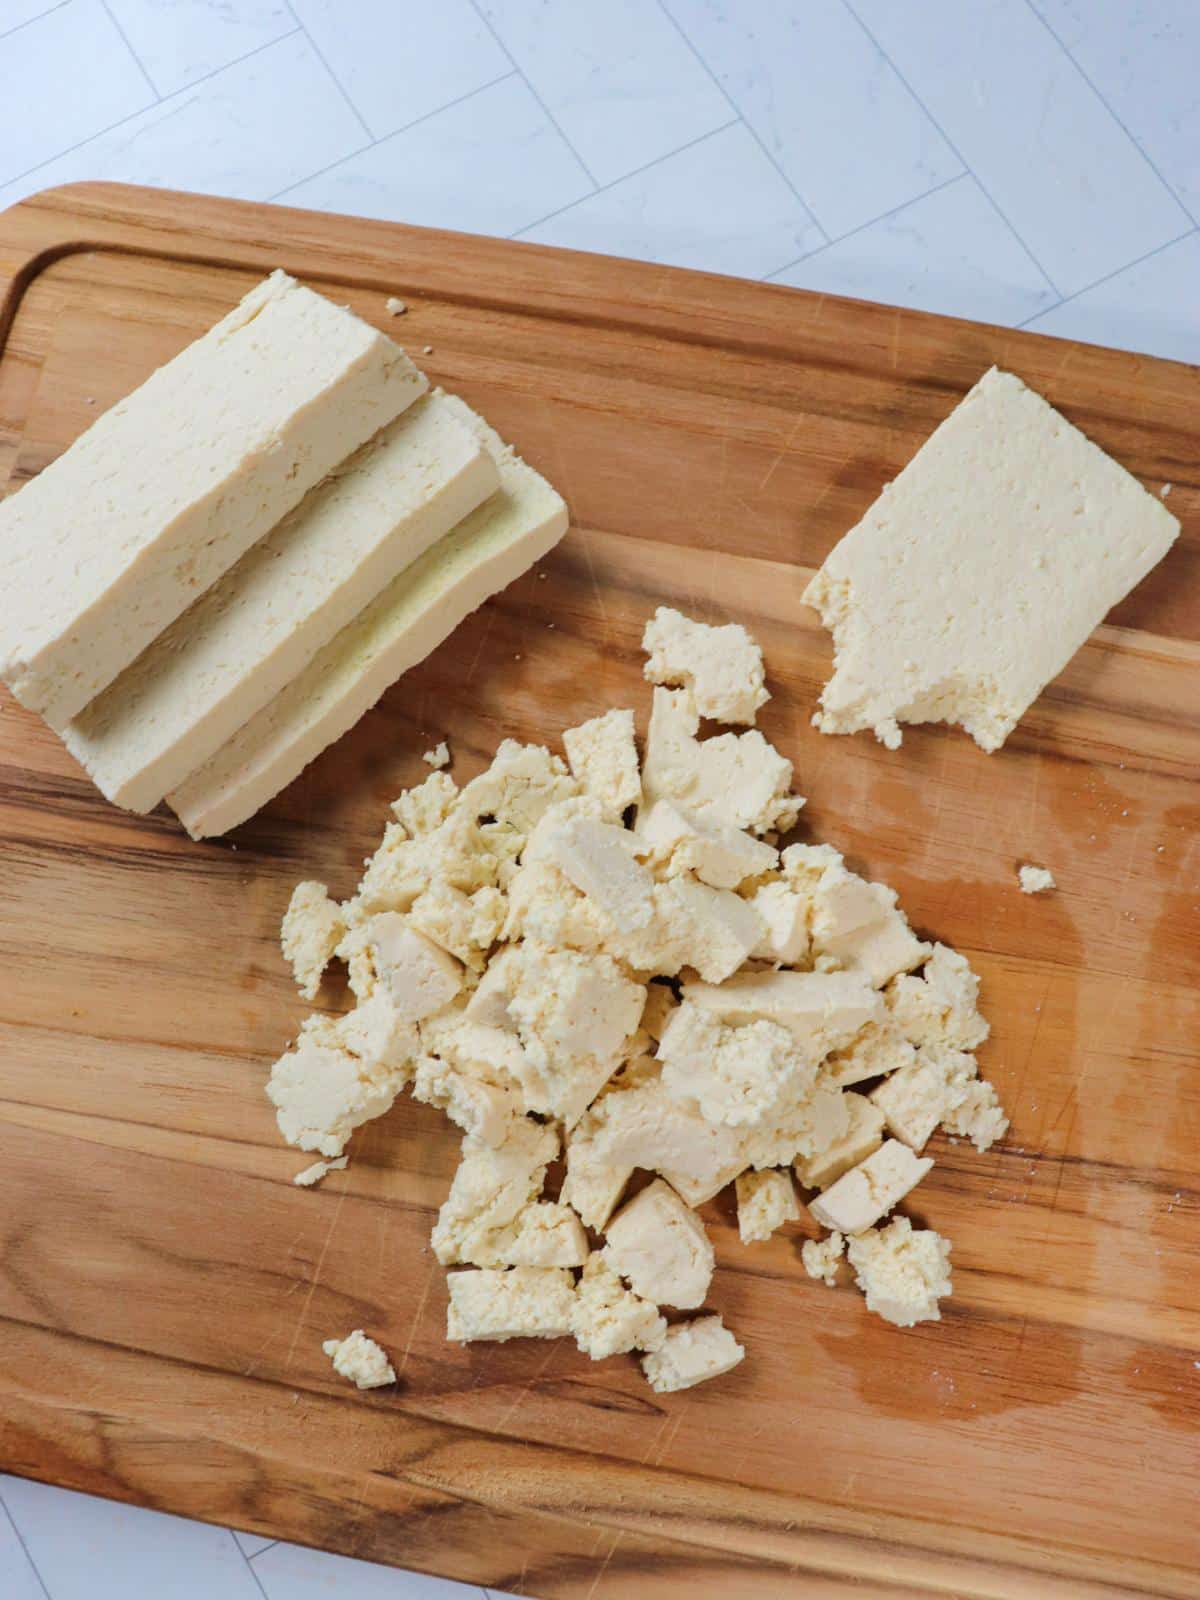 Tofu being cut into slices, then torn into bite sized pieces.